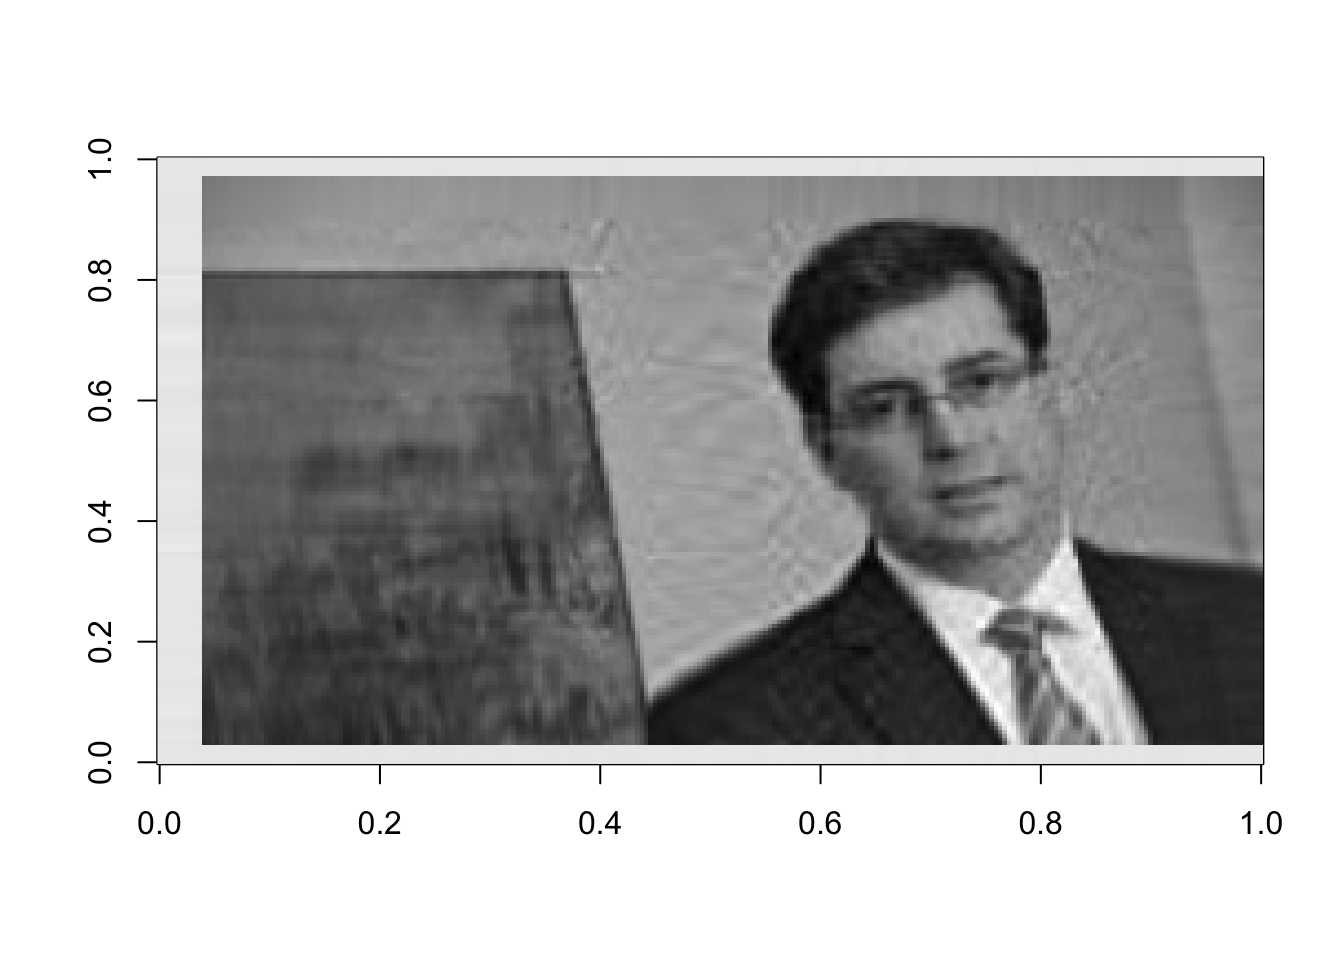 Rank 50 approximation of the image data